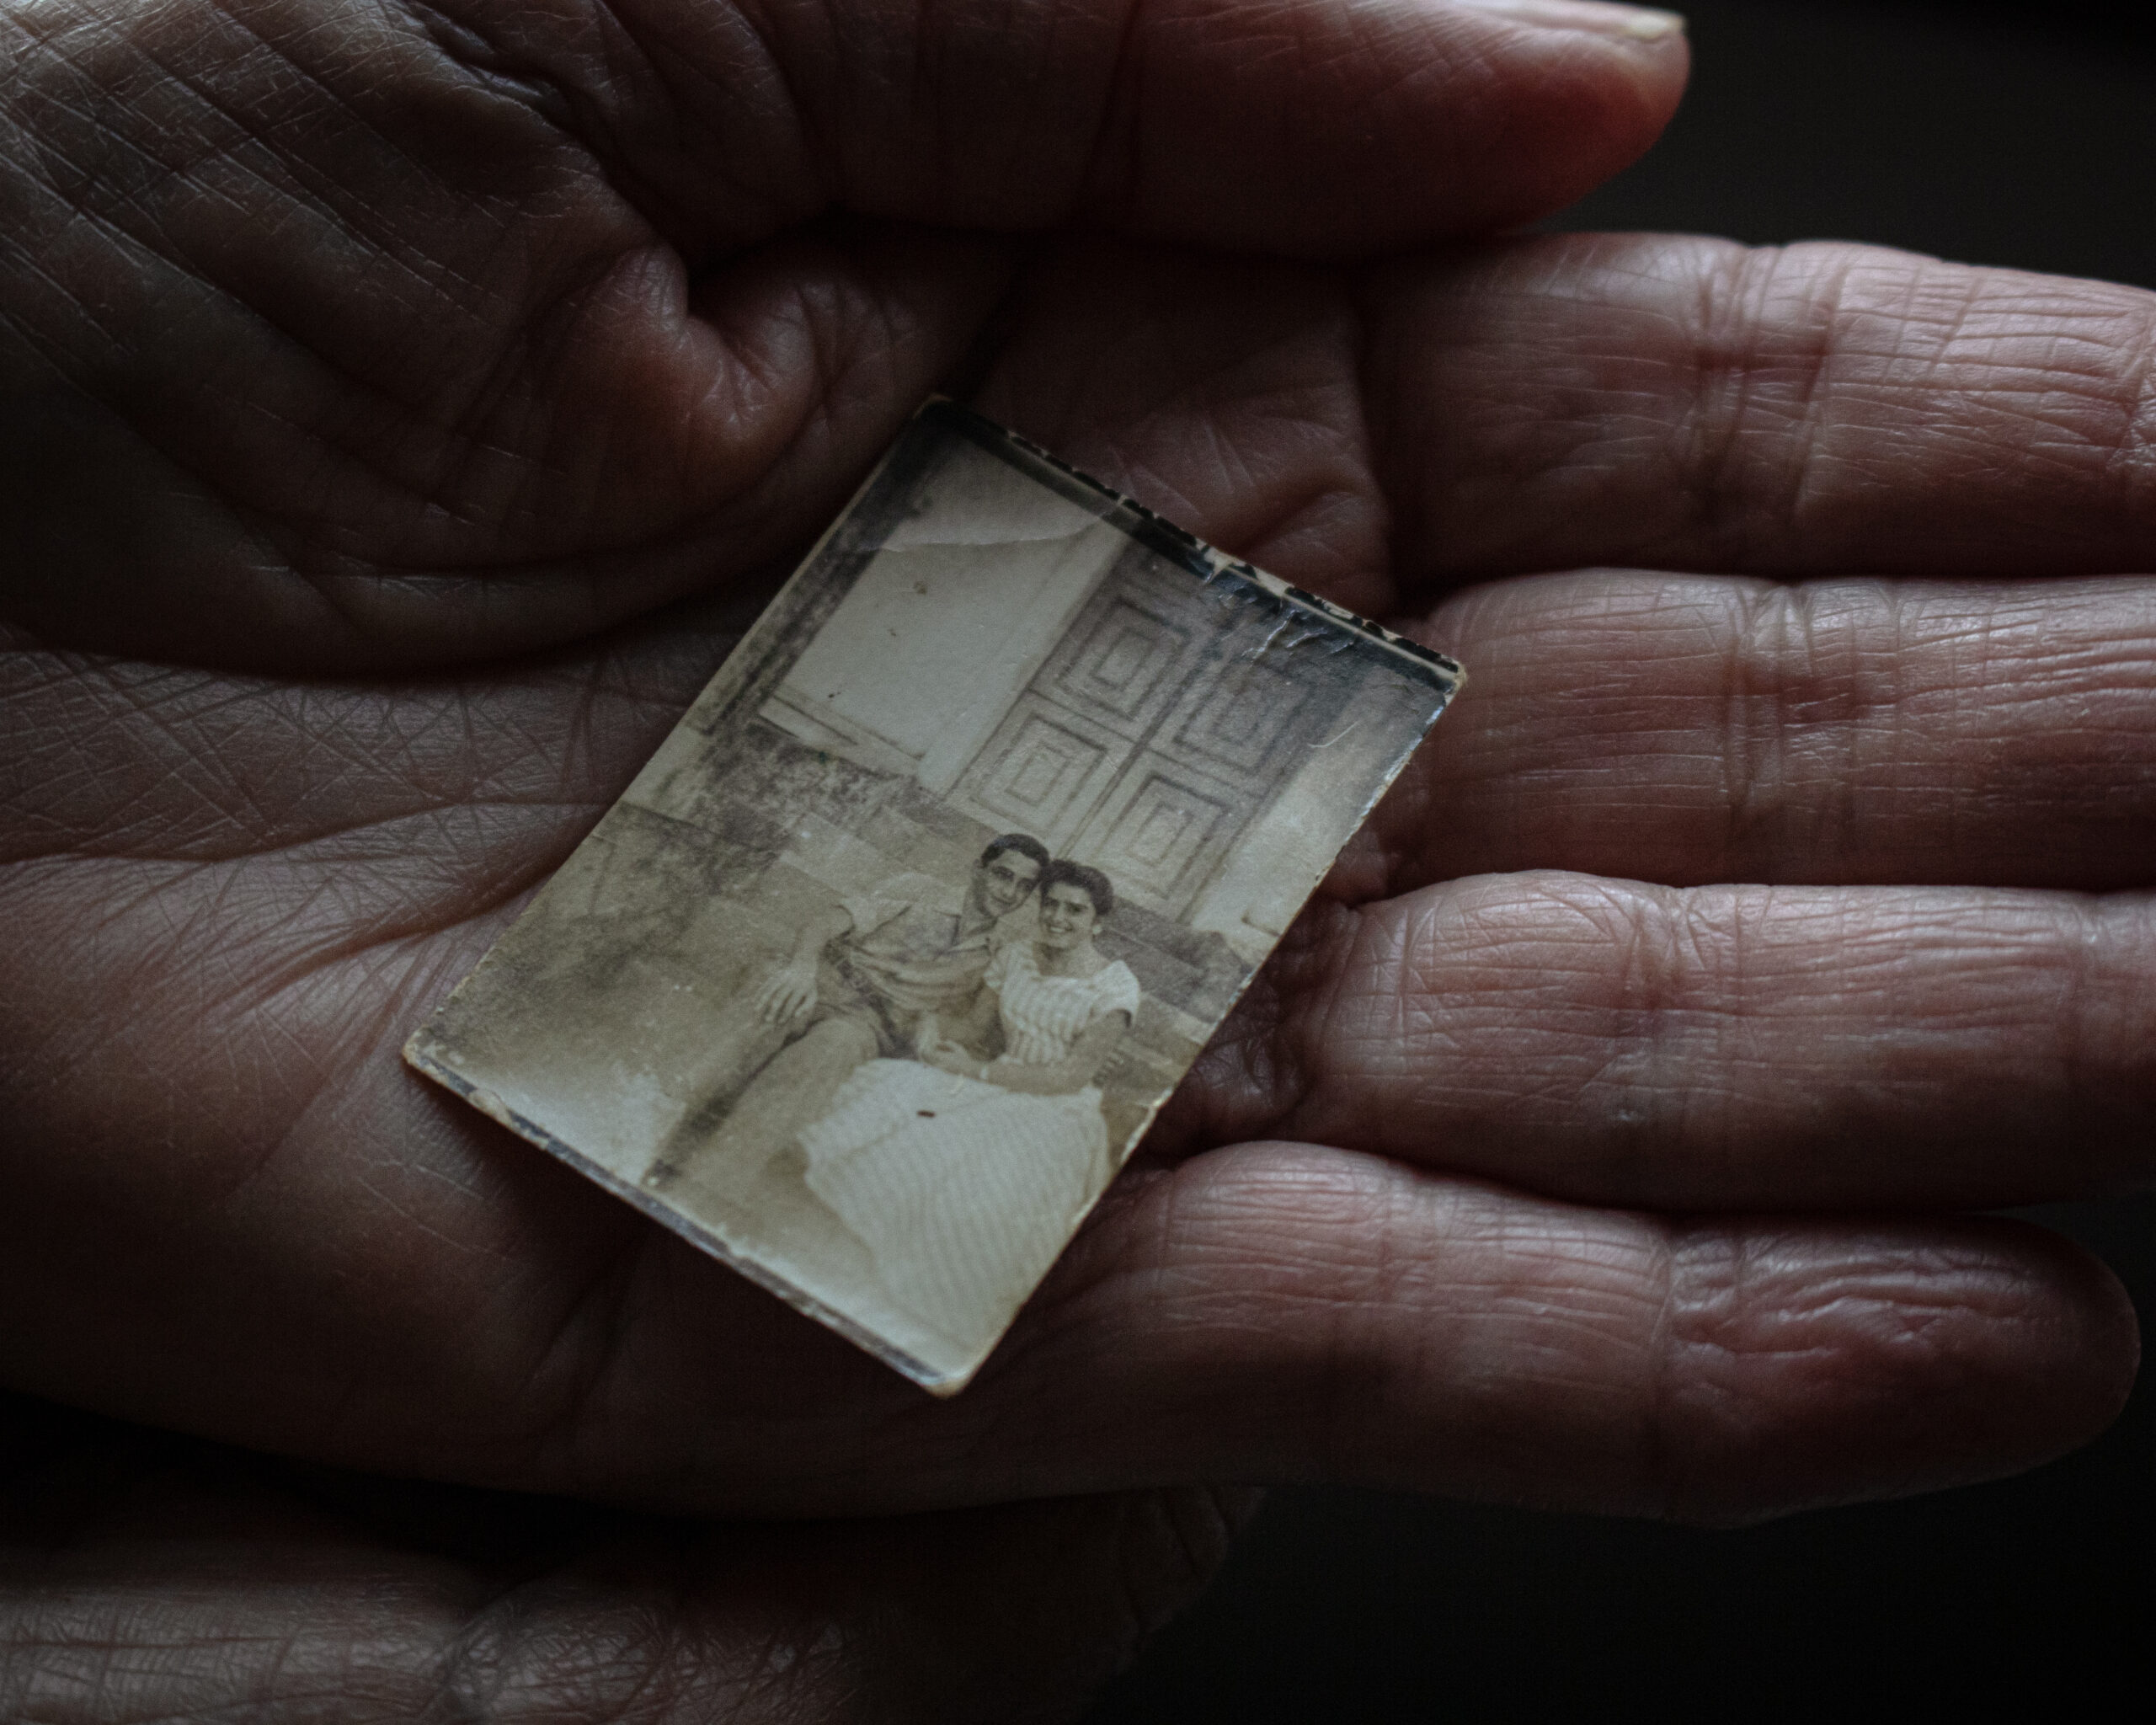 My grandmother Elvira holds in the palm of her hand a photograph of herself with my grandfather, Edivaldo, in their youth.